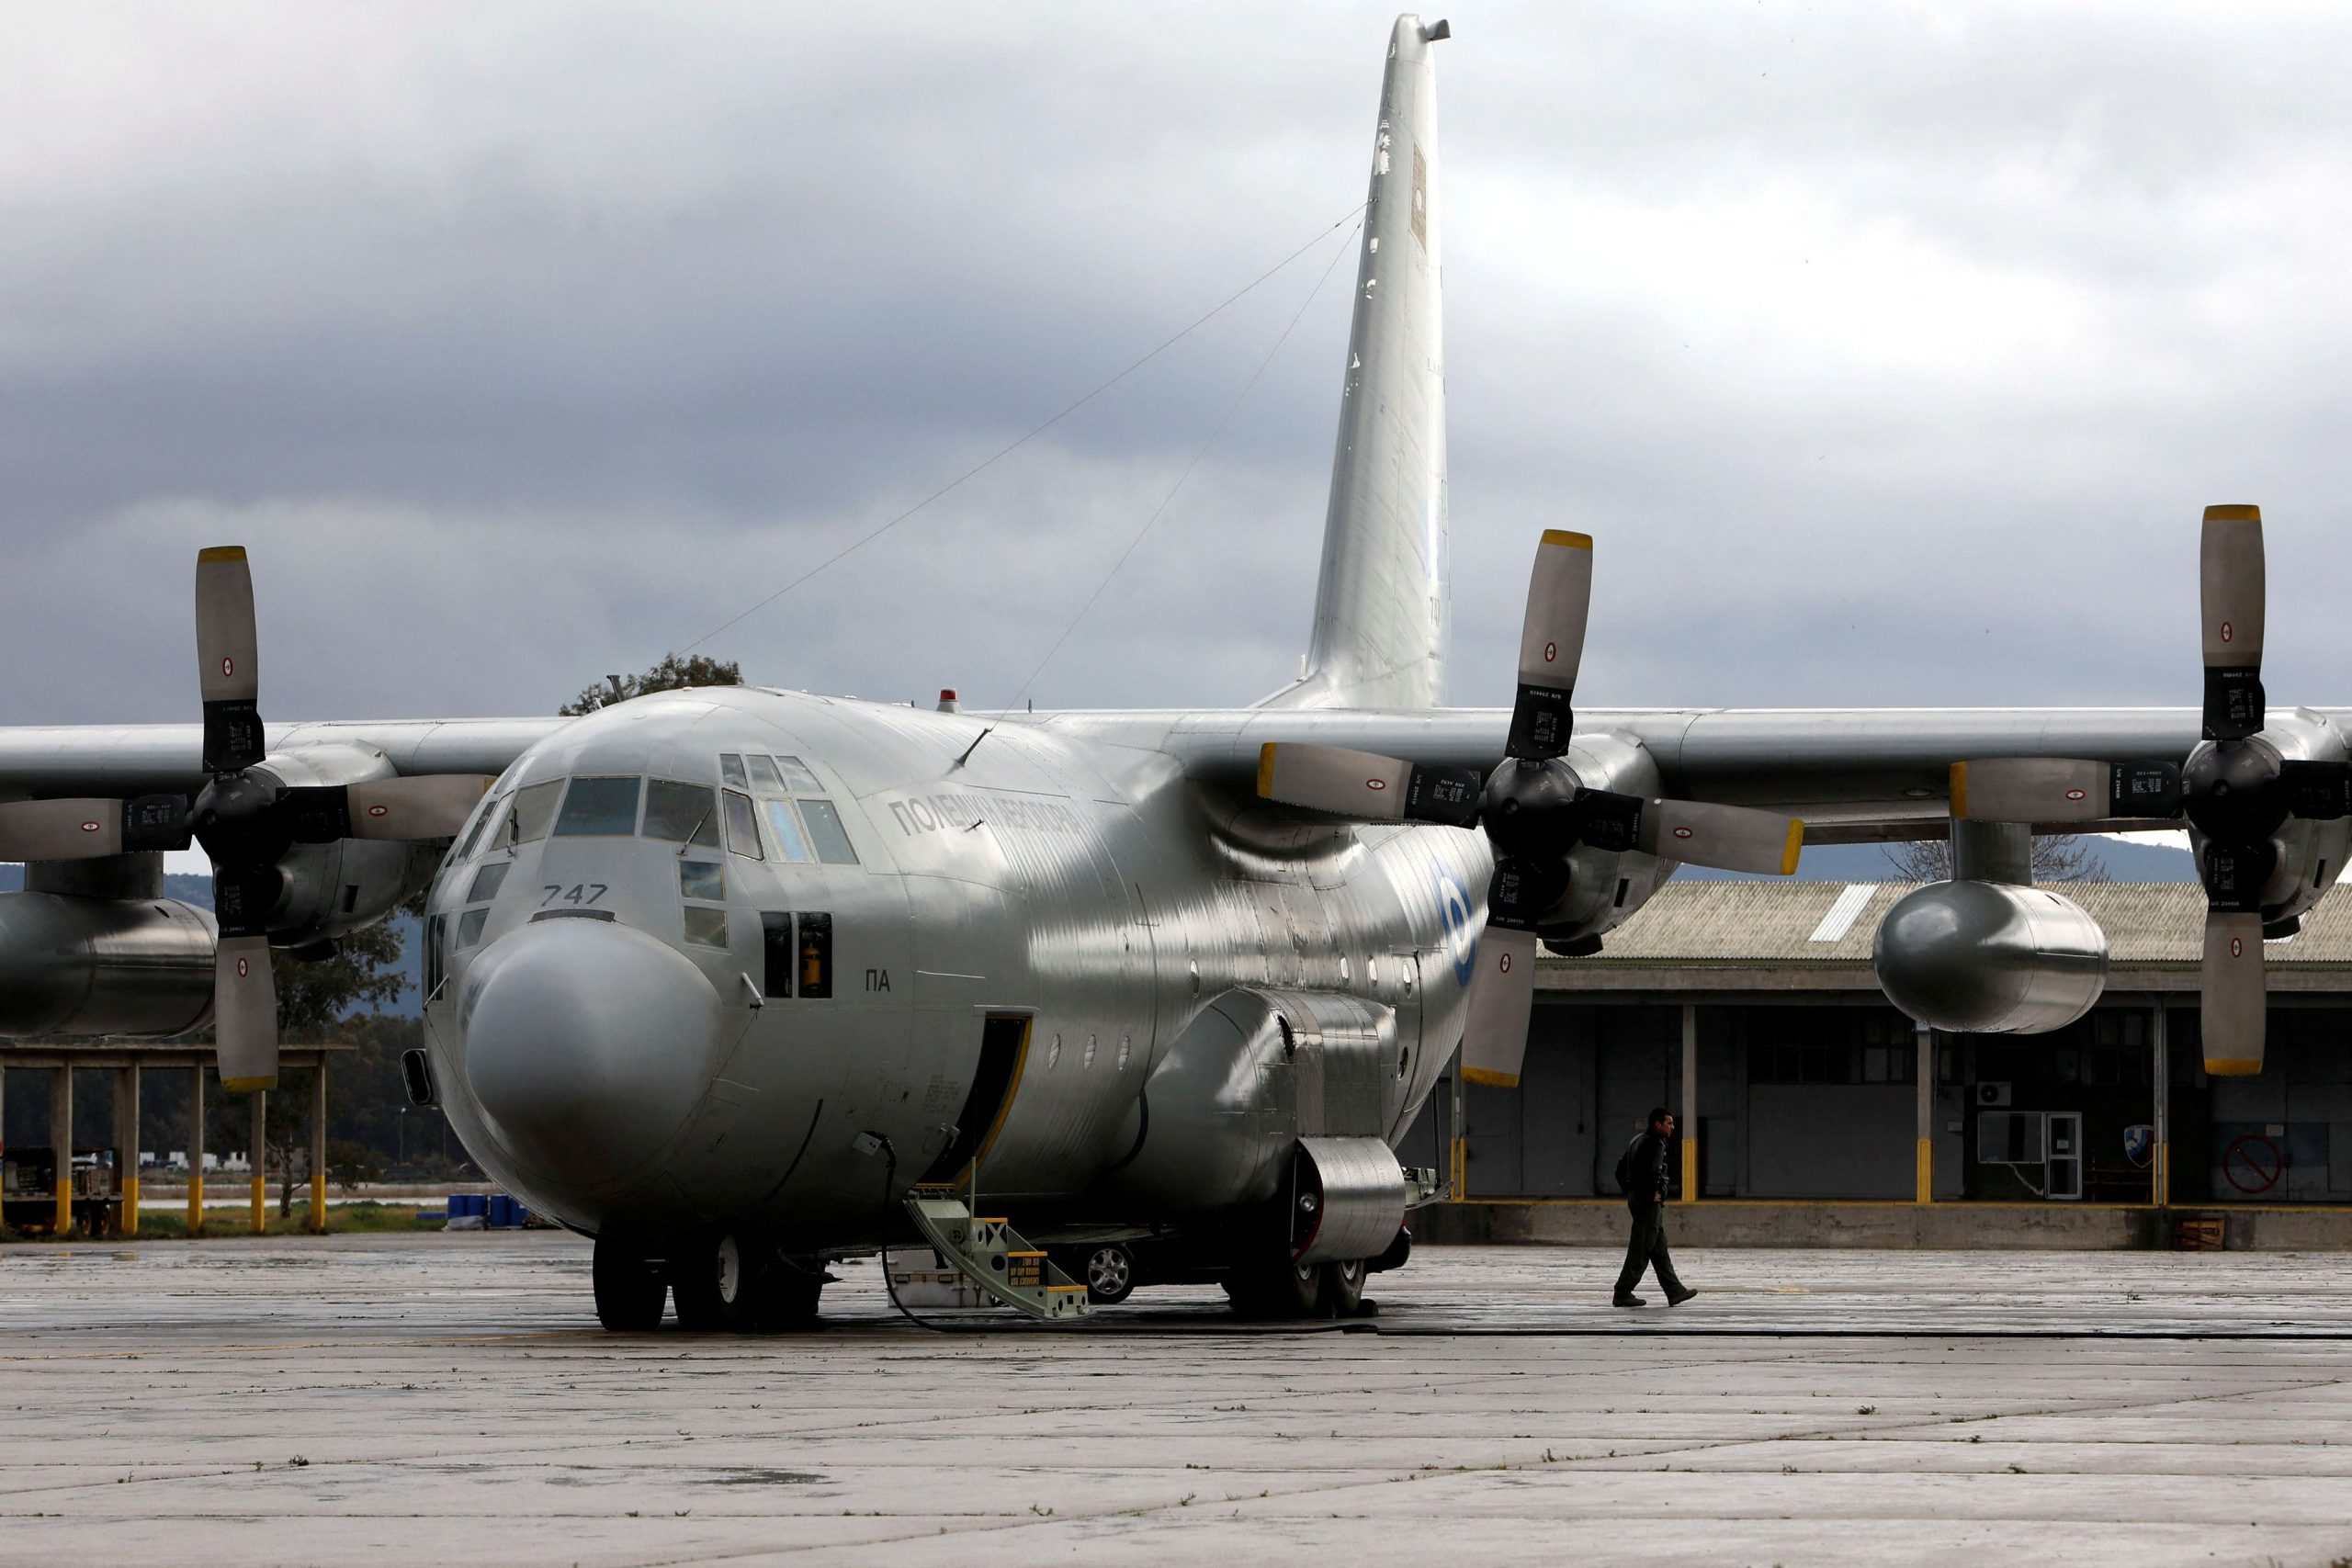 Military, humanitarian supplies for Ukrainian people flown to Poland on three airplanes